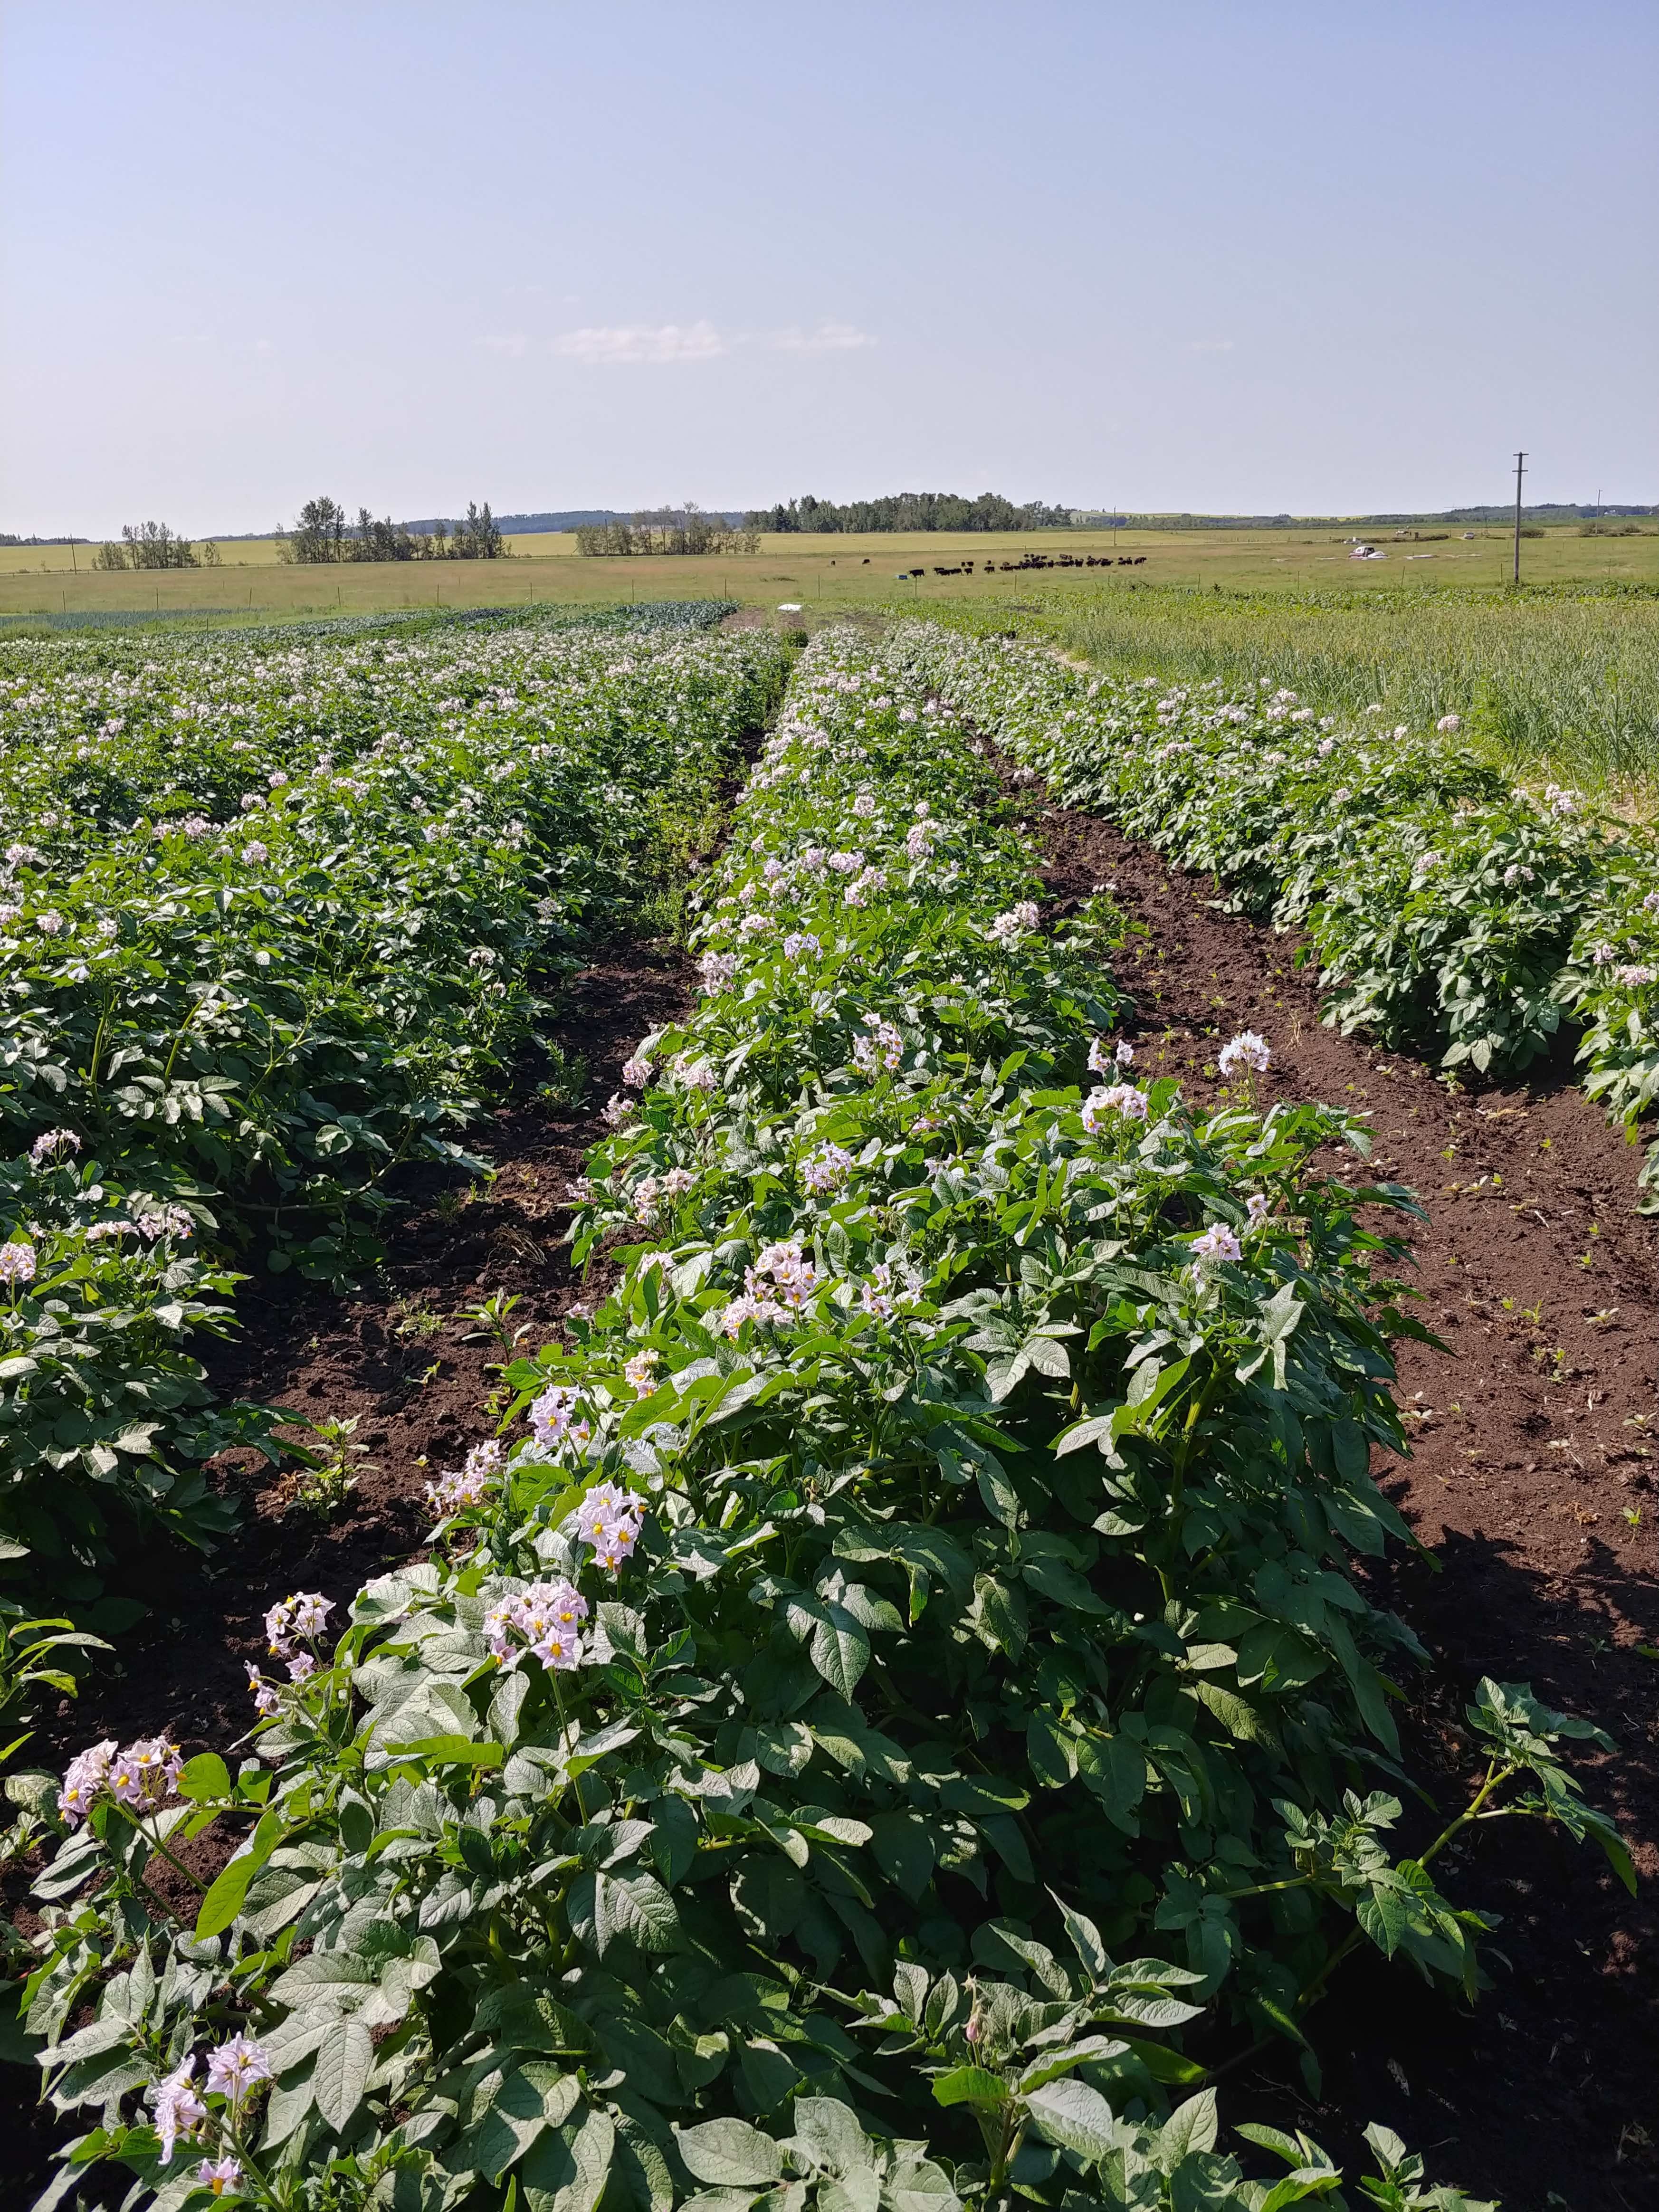 Next Happening: Farm Happenings for August 6, 2019 - Potatoes and Beef